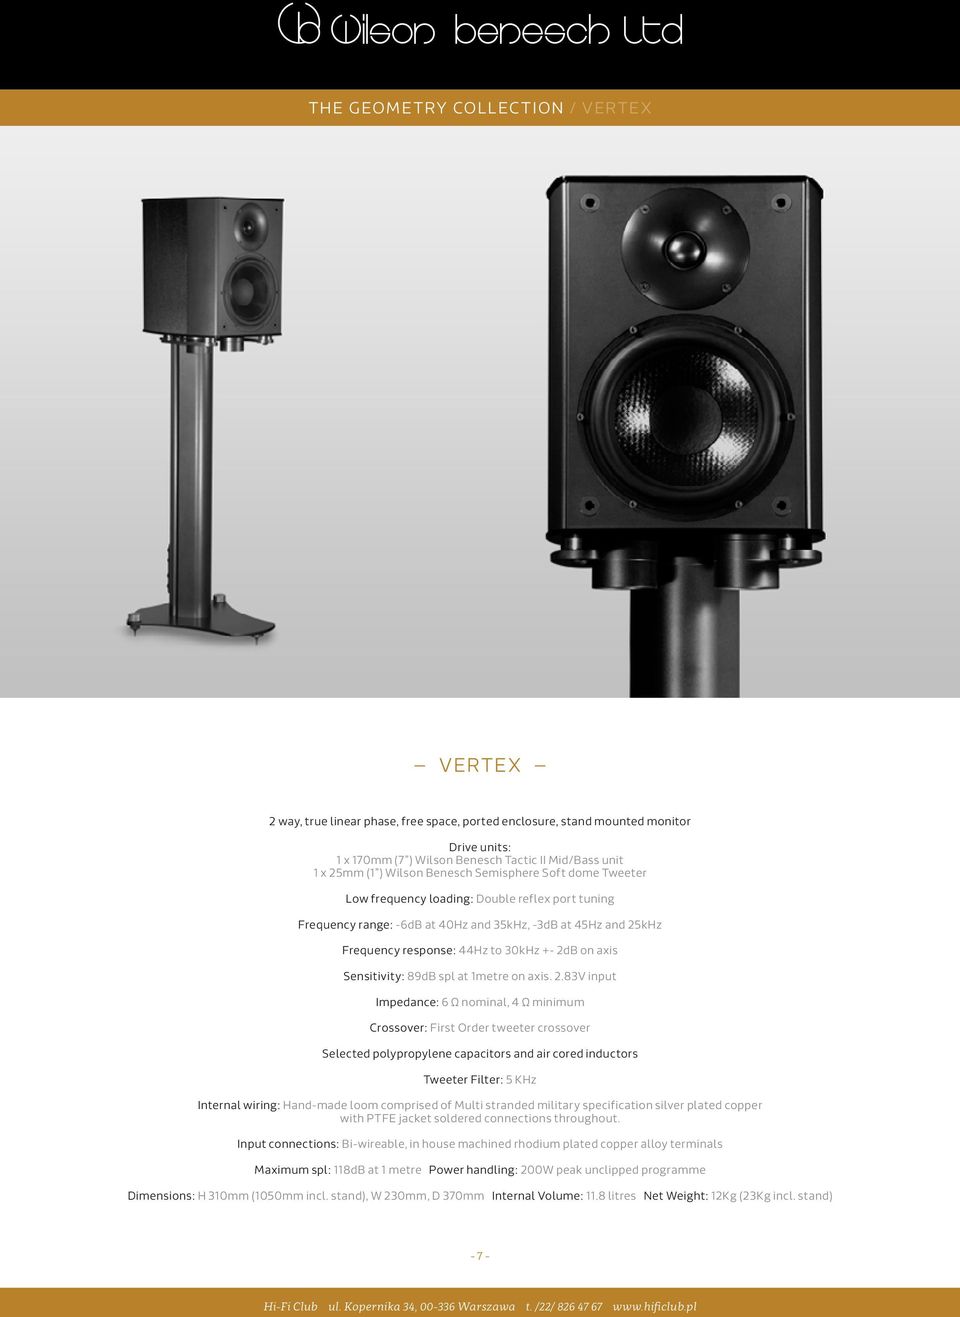 on axis Sensitivity: 89dB spl at 1metre on axis. 2.